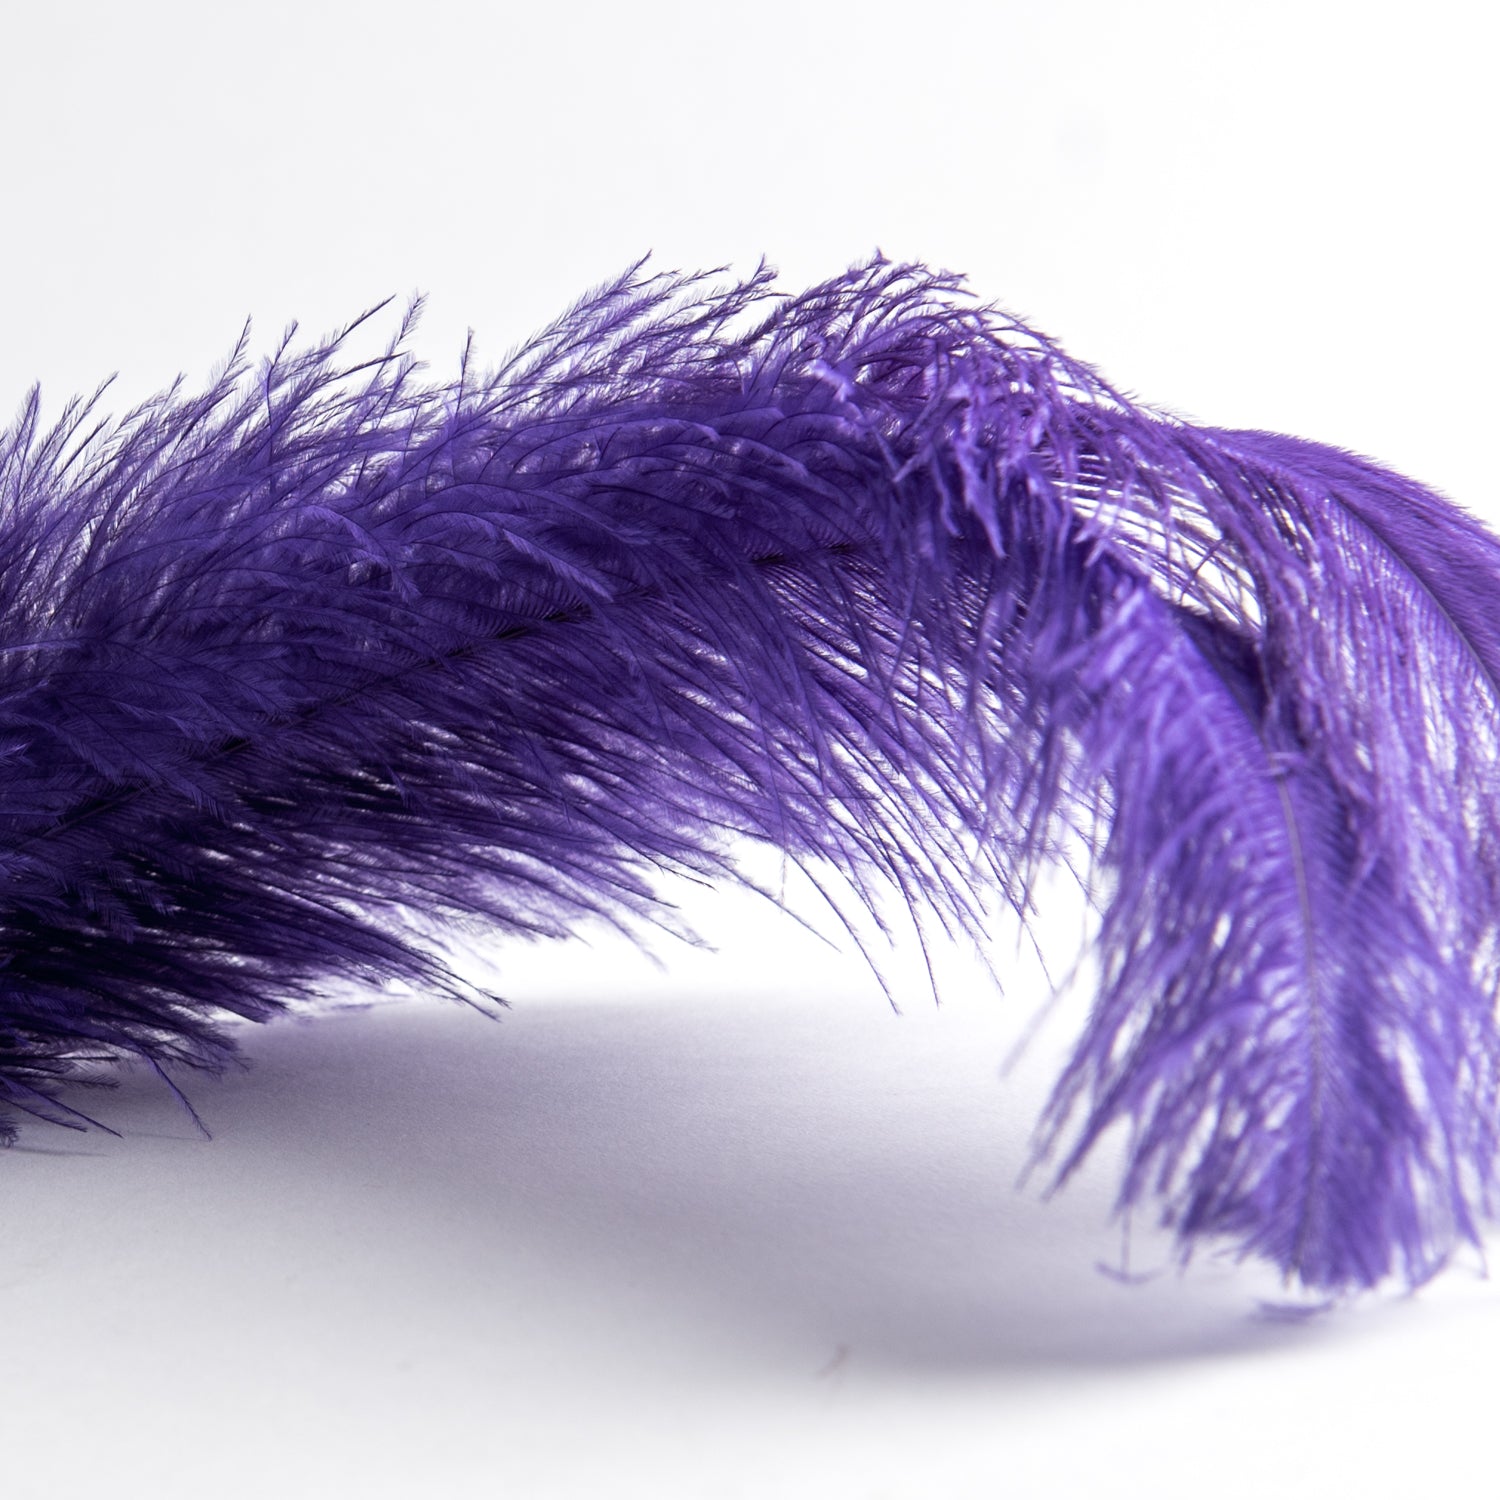 Large Ostrich Feather Tickler